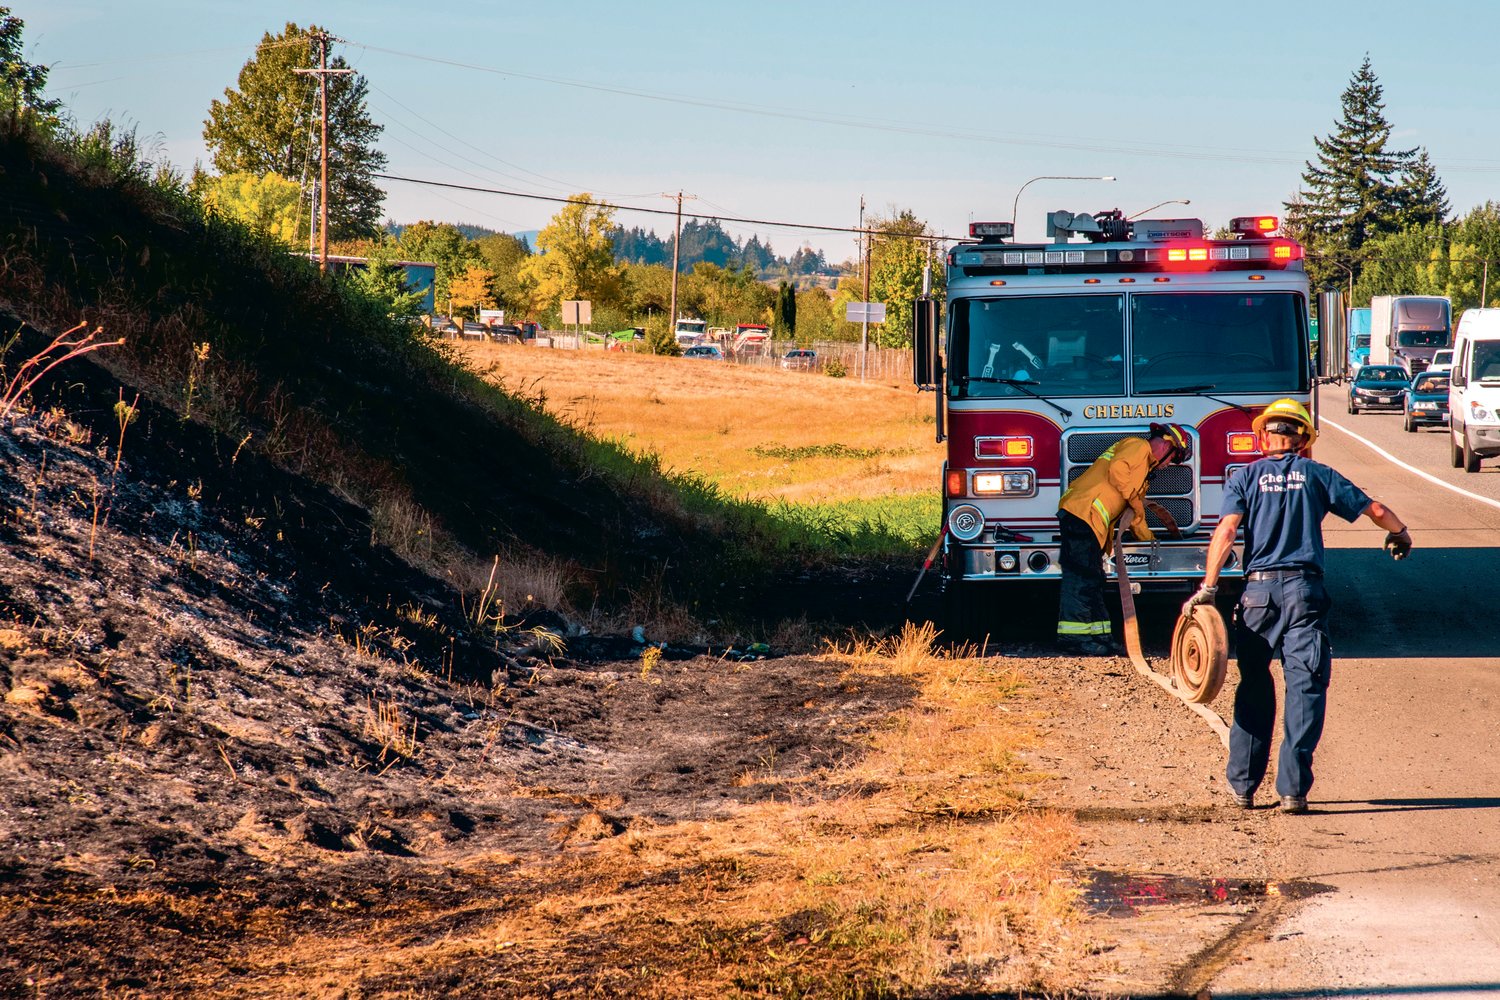 Chehalis fire crews pick up hose lines after responding to a call for a brush fire along the southbound lane of Interstate 5 near milepost 77 Tuesday afternoon.